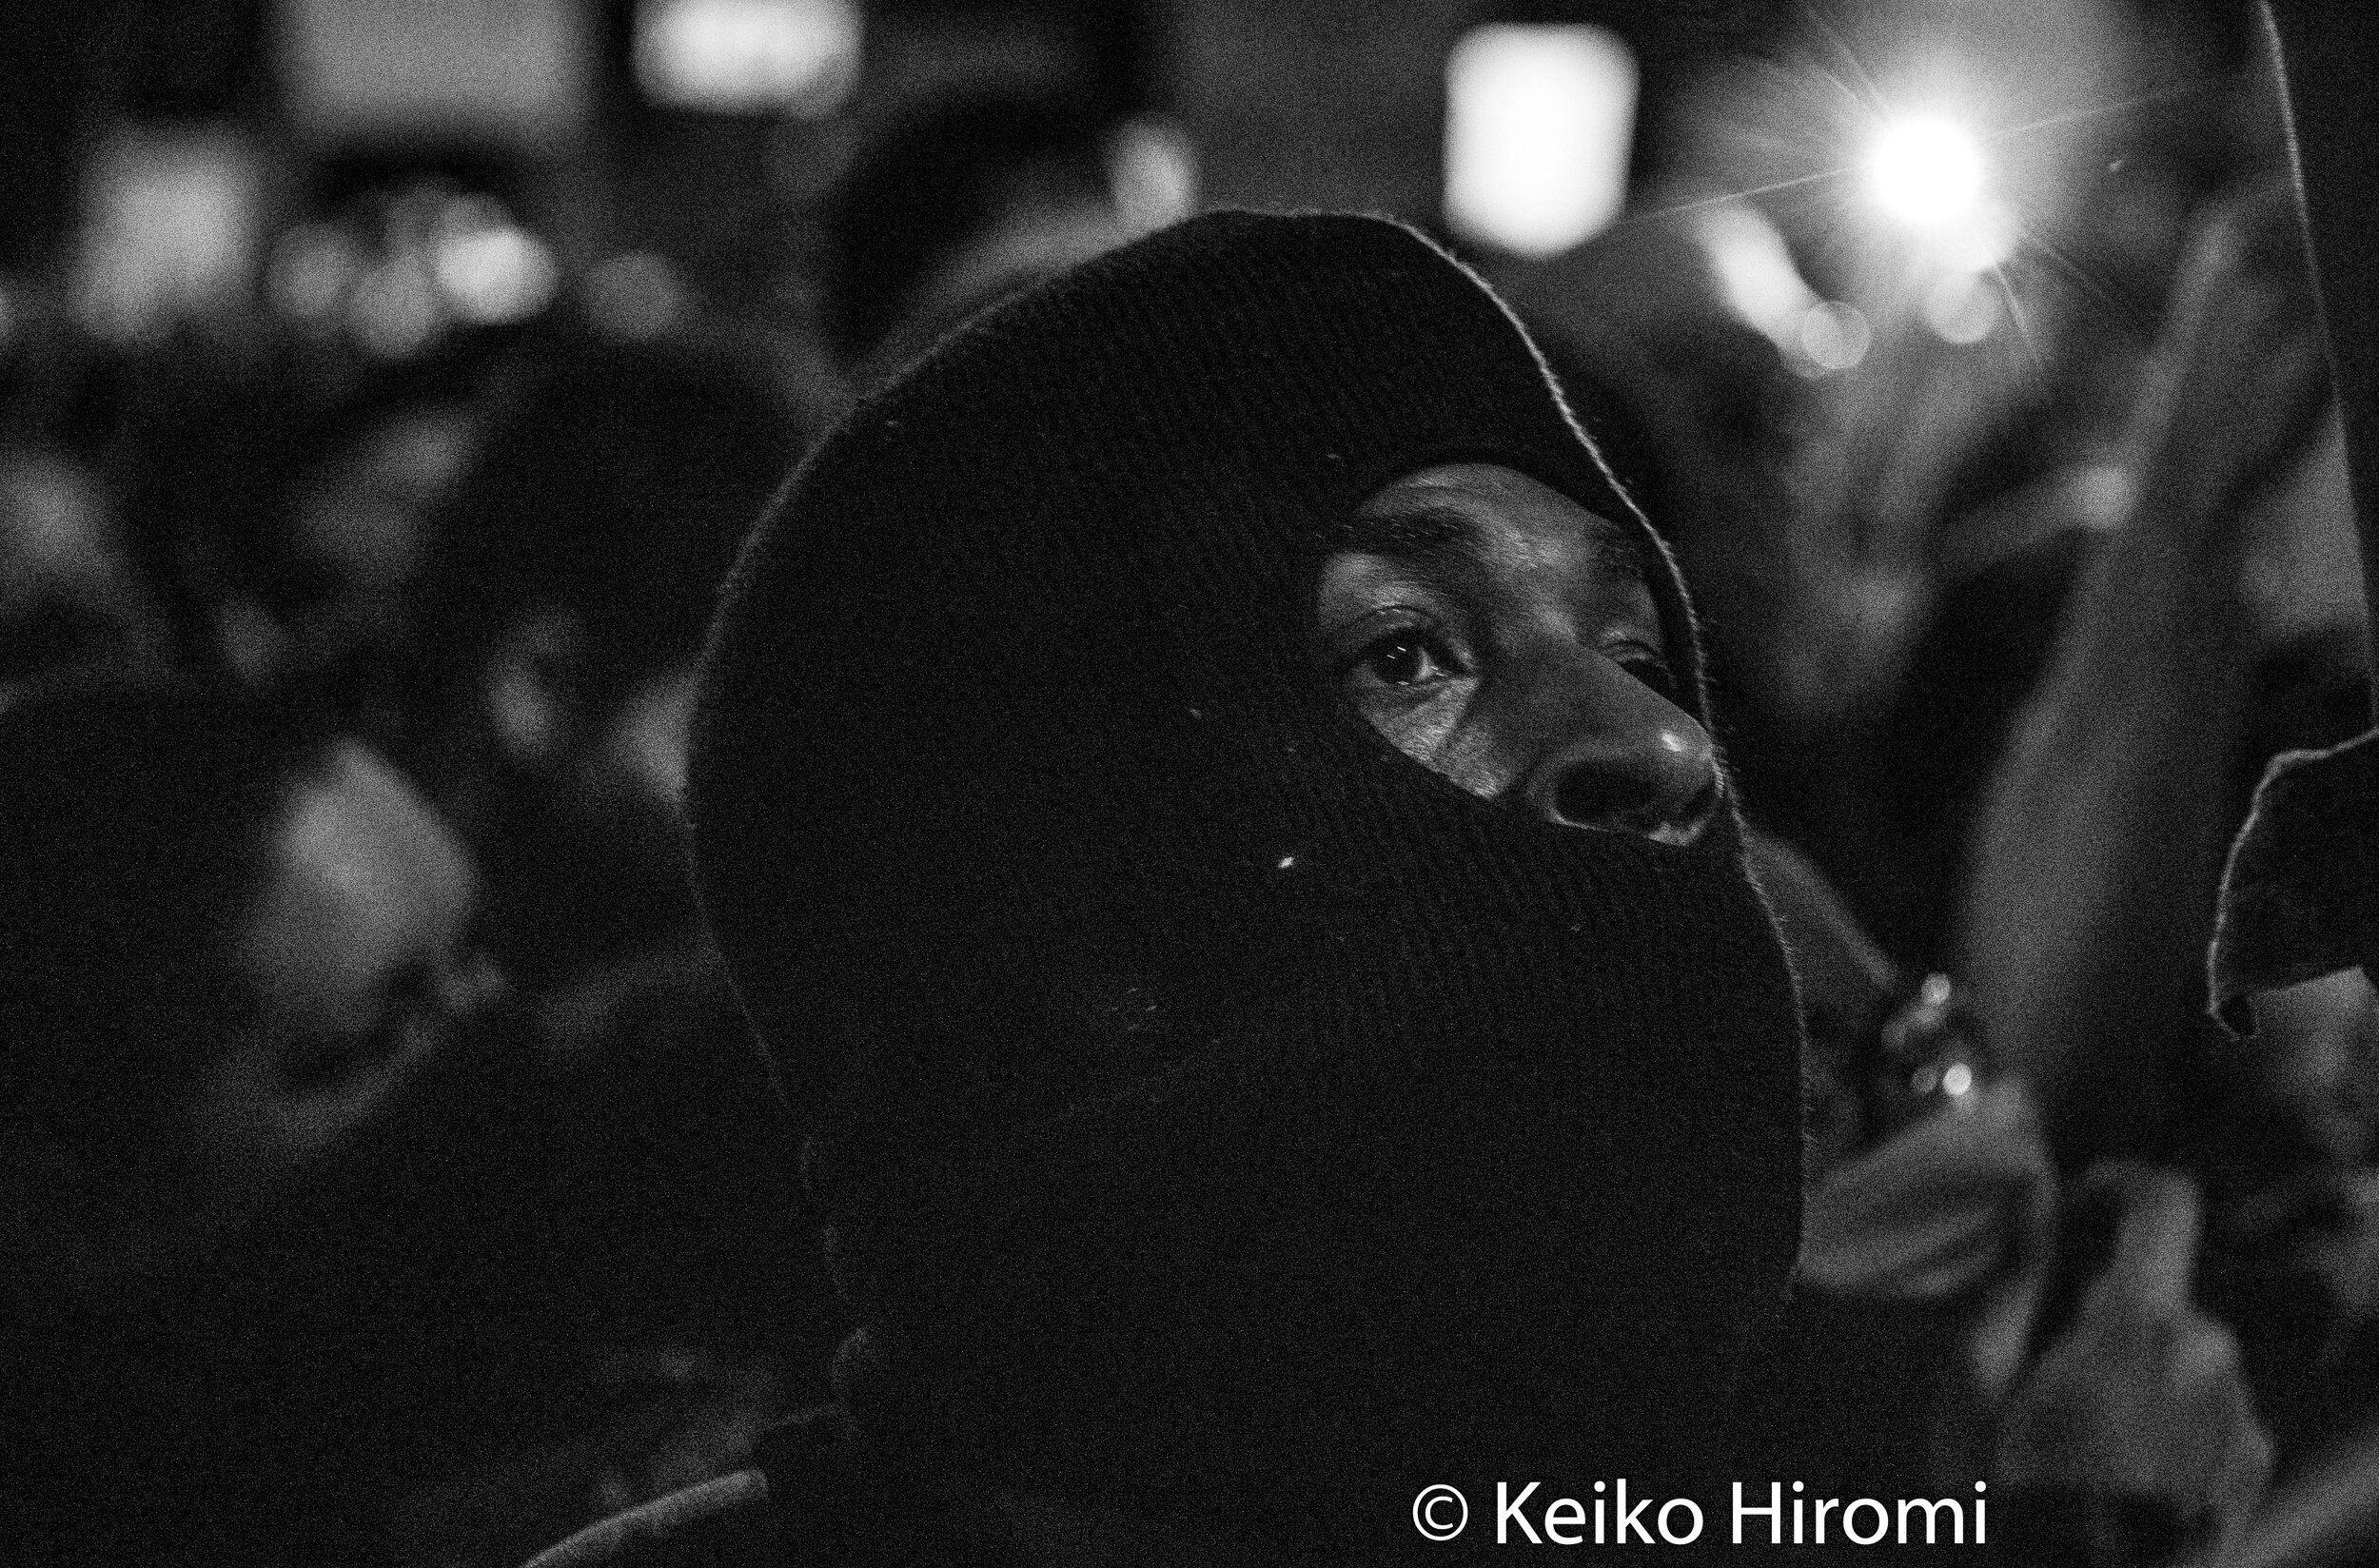  May 31, 2020, Boston, Massachusetts, USA: A protester listening to activists during a rally in response to deaths of George Floyd and against police brutality and racism in Boston. 